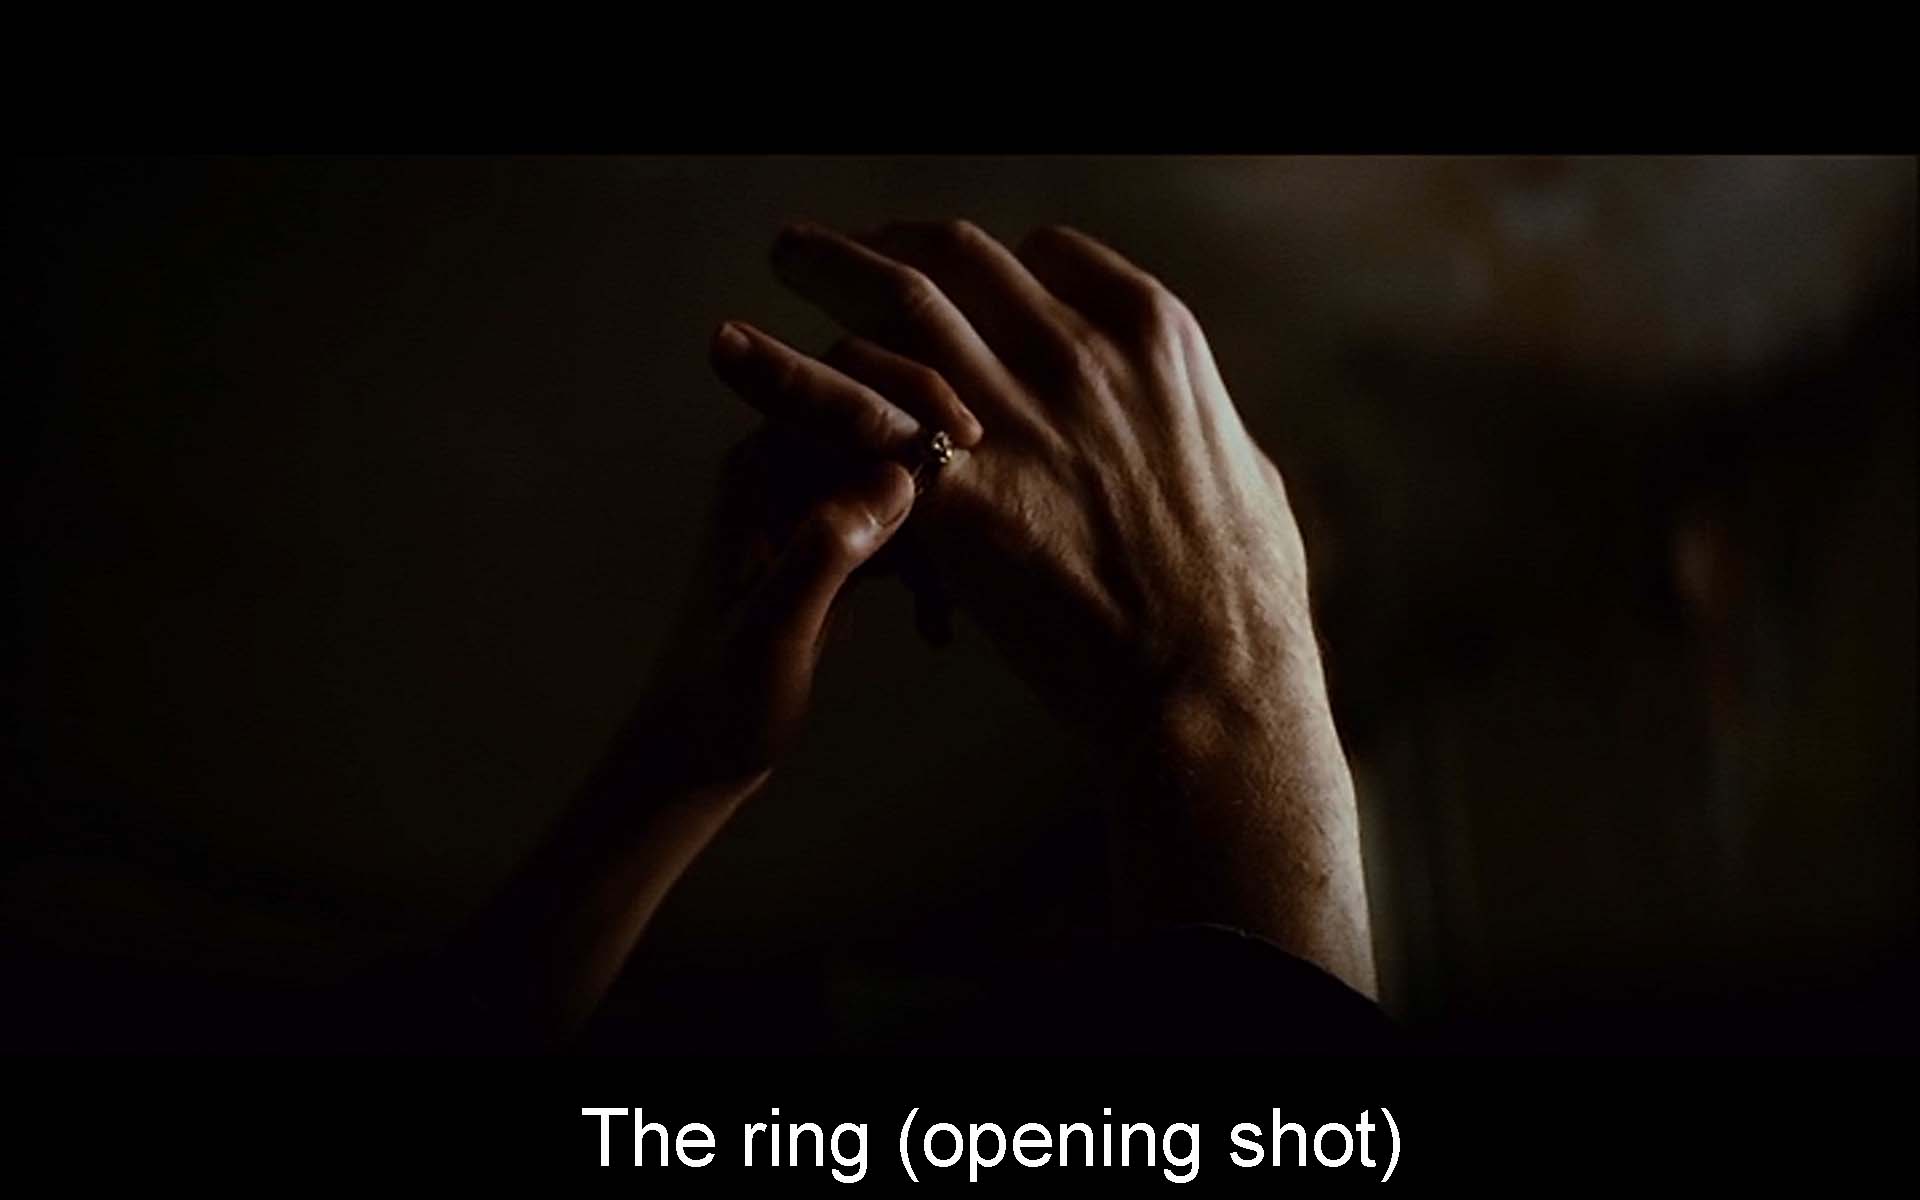 The ring (opening shot)